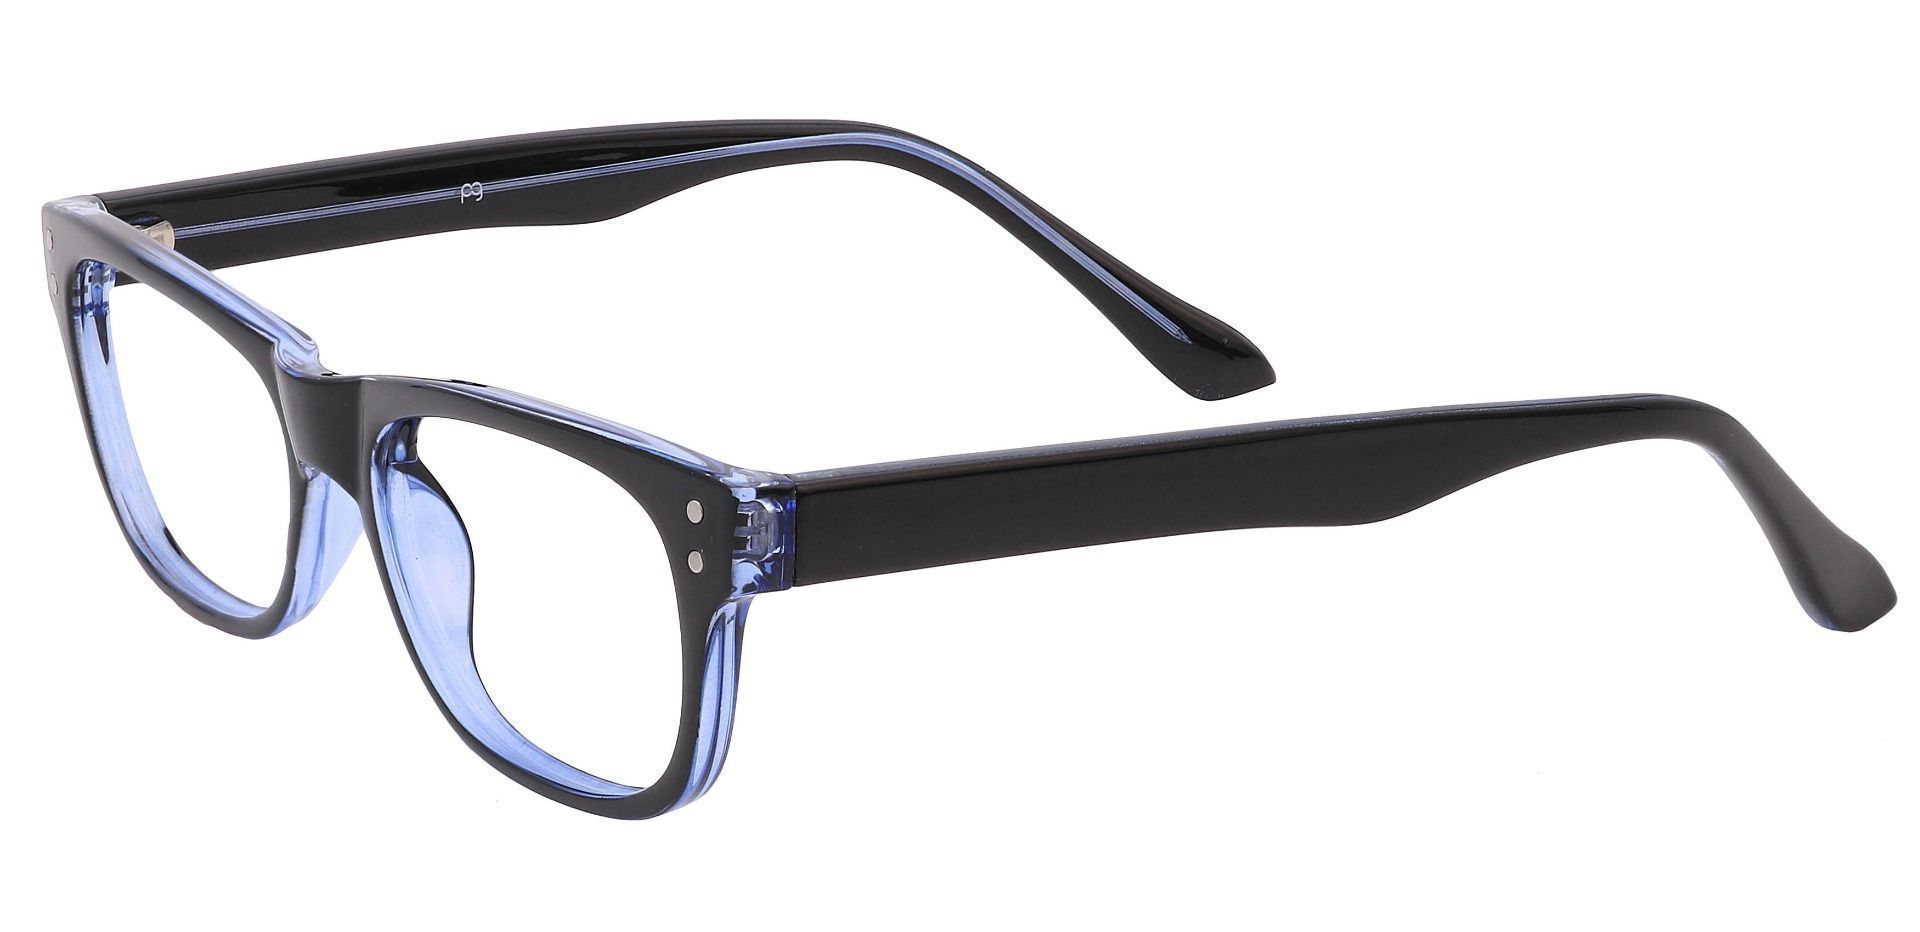 Murphy Rectangle Reading Glasses - The Frame Is Blue And Black